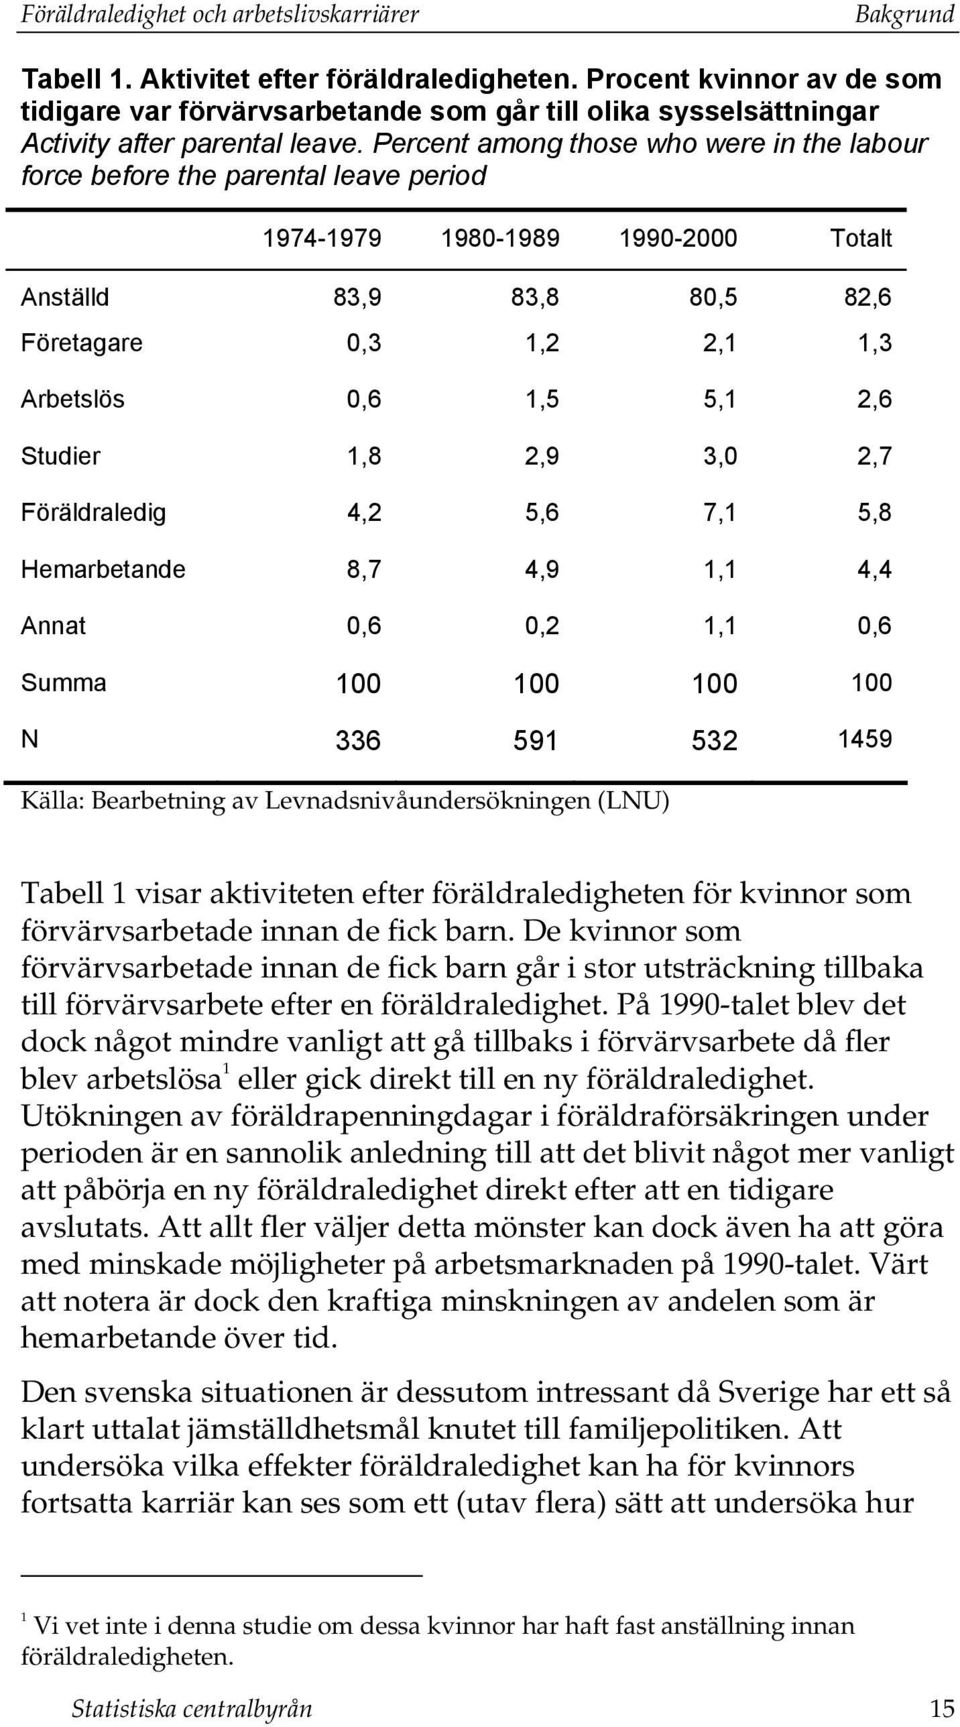 Percent among those who were in the labour force before the parental leave period 1974-1979 1980-1989 1990-2000 Totalt Anställd 83,9 83,8 80,5 82,6 Företagare 0,3 1,2 2,1 1,3 Arbetslös 0,6 1,5 5,1